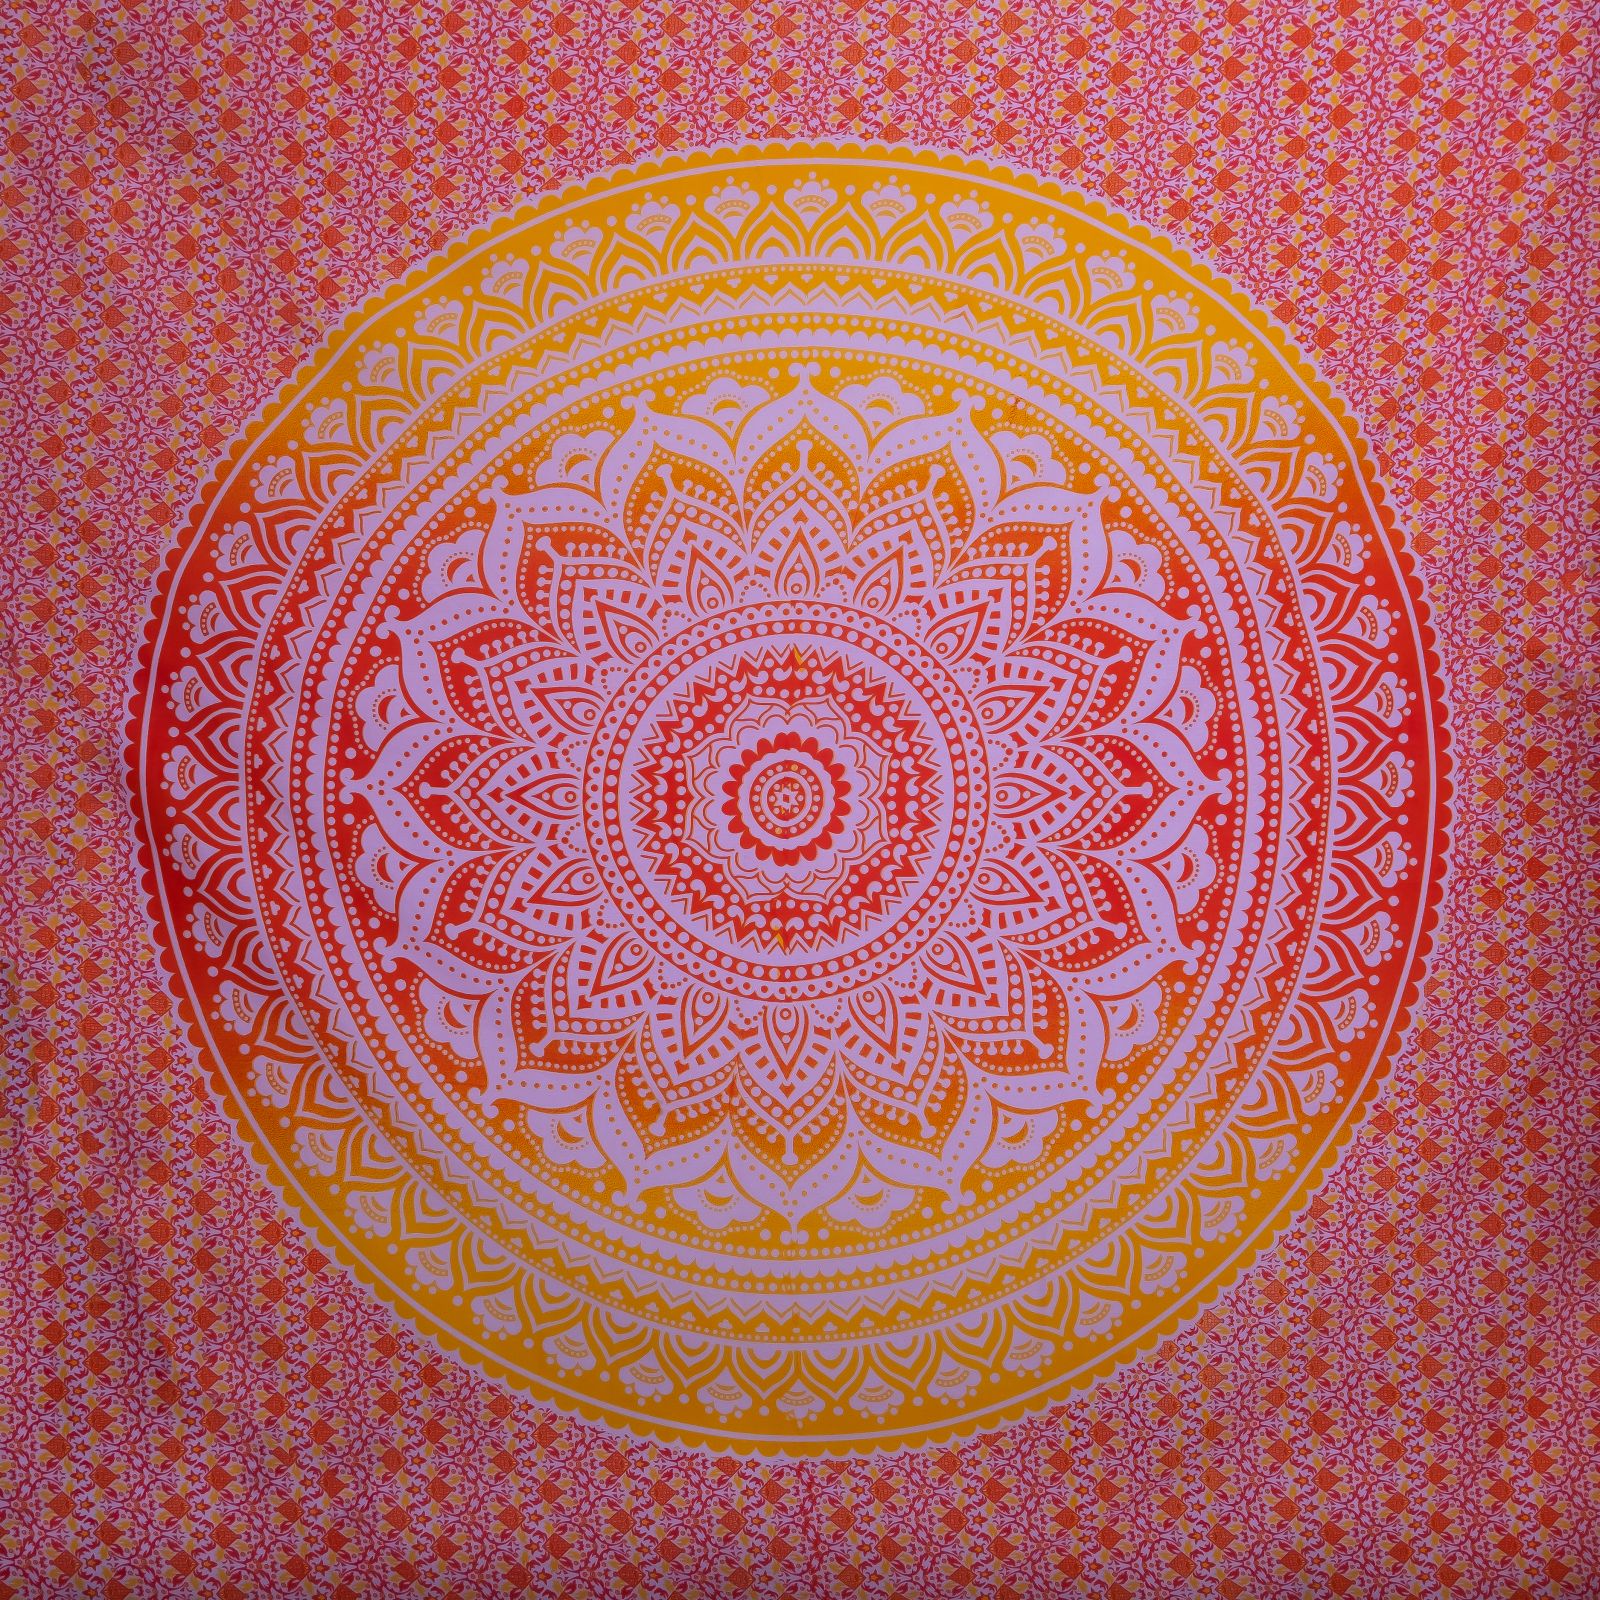 Cotton bed cover Mandala – red-yellow 2 India